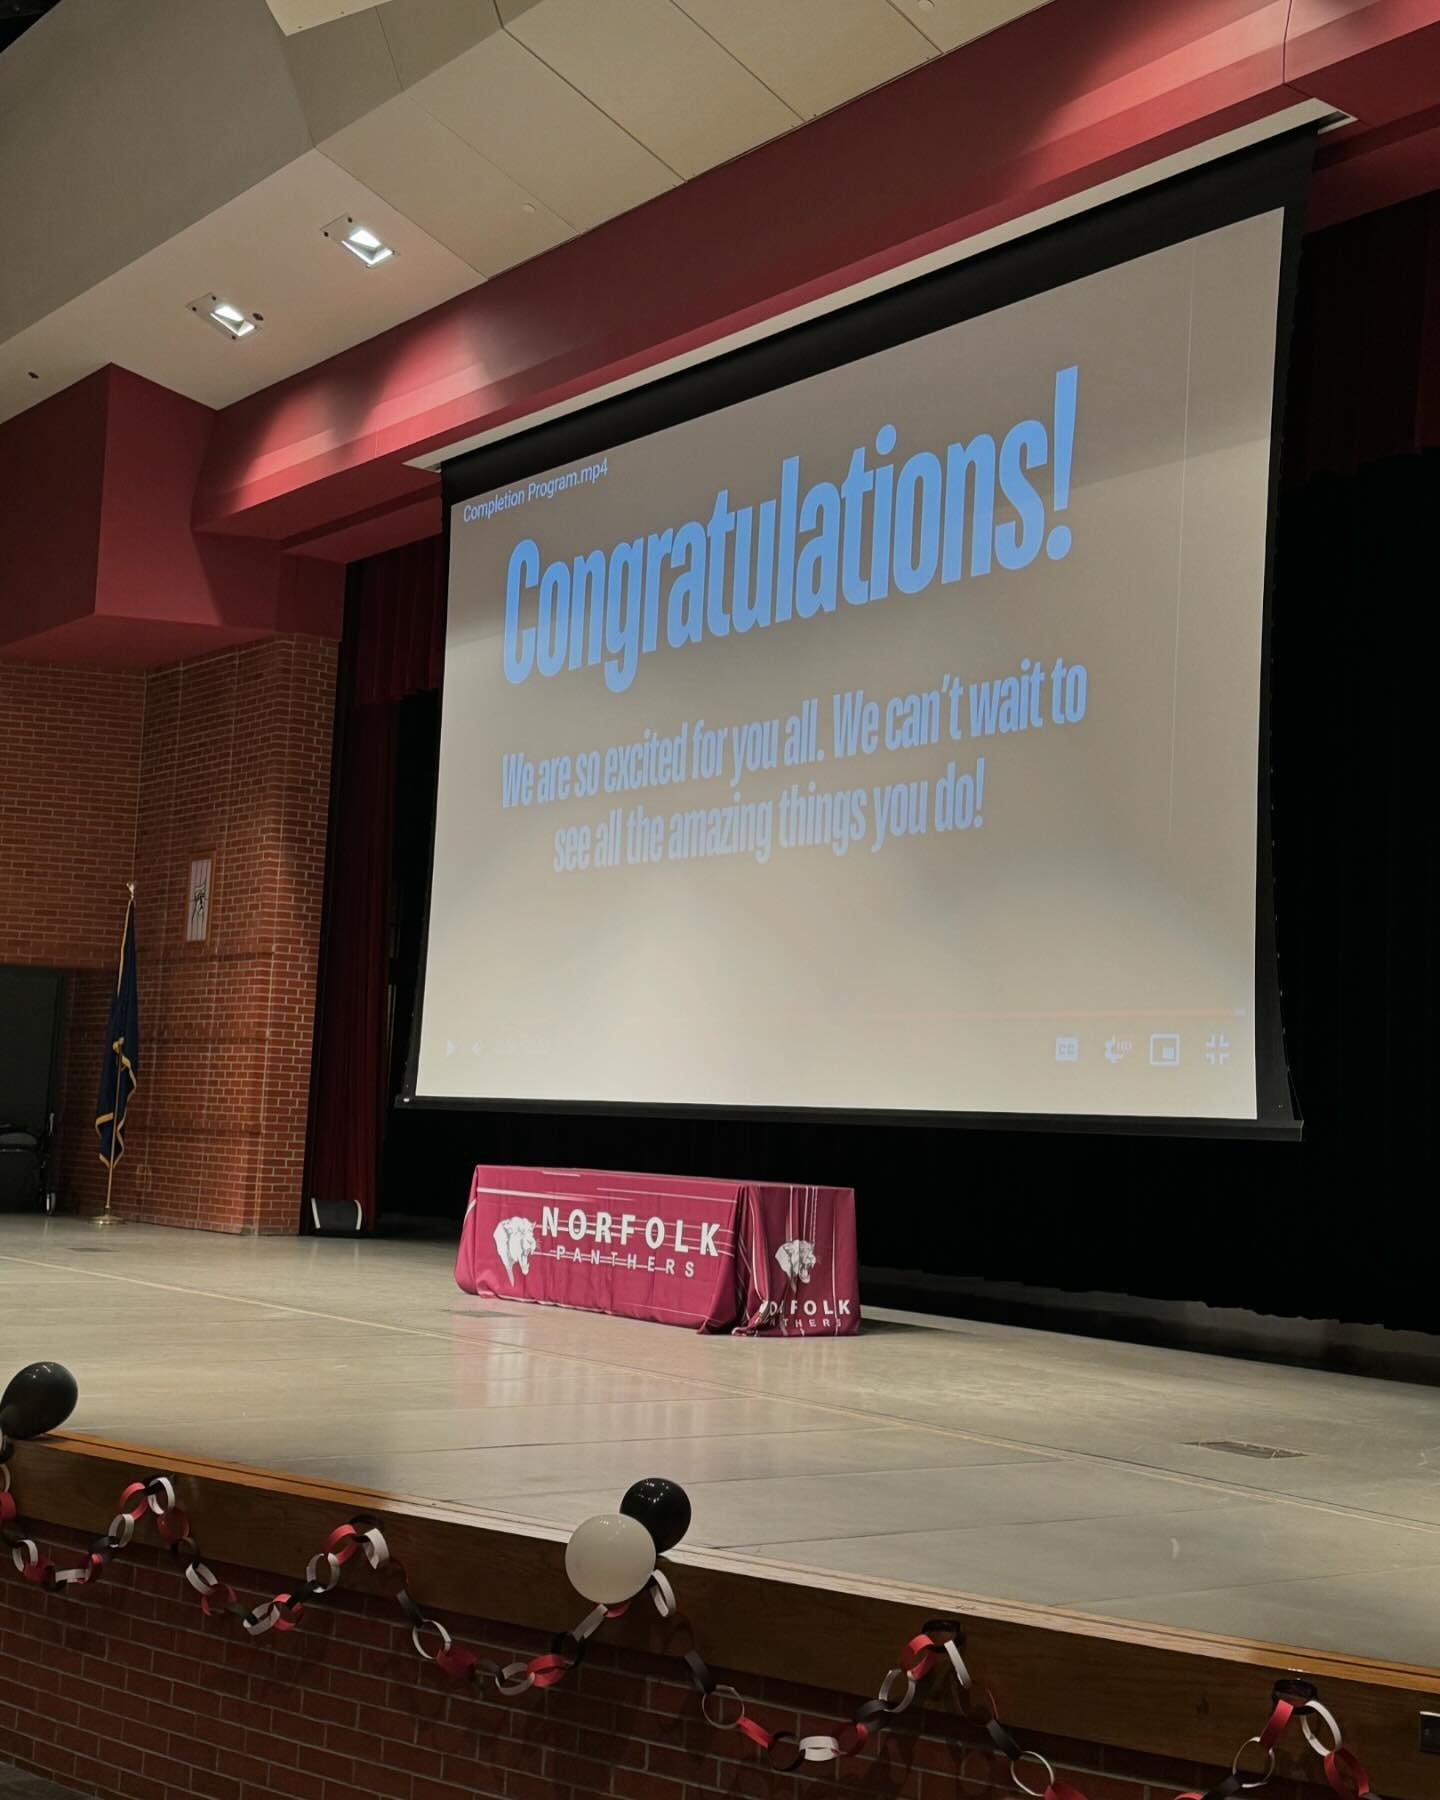 Congratulations to all the students who were honored for their completion of NPS&rsquo; Life Program and Operation N&rsquo;ployability last week. Wishing each of you the best in this next chapter of your lives 🎓💐🎓#norfolkpublicschools #norfolkpubl